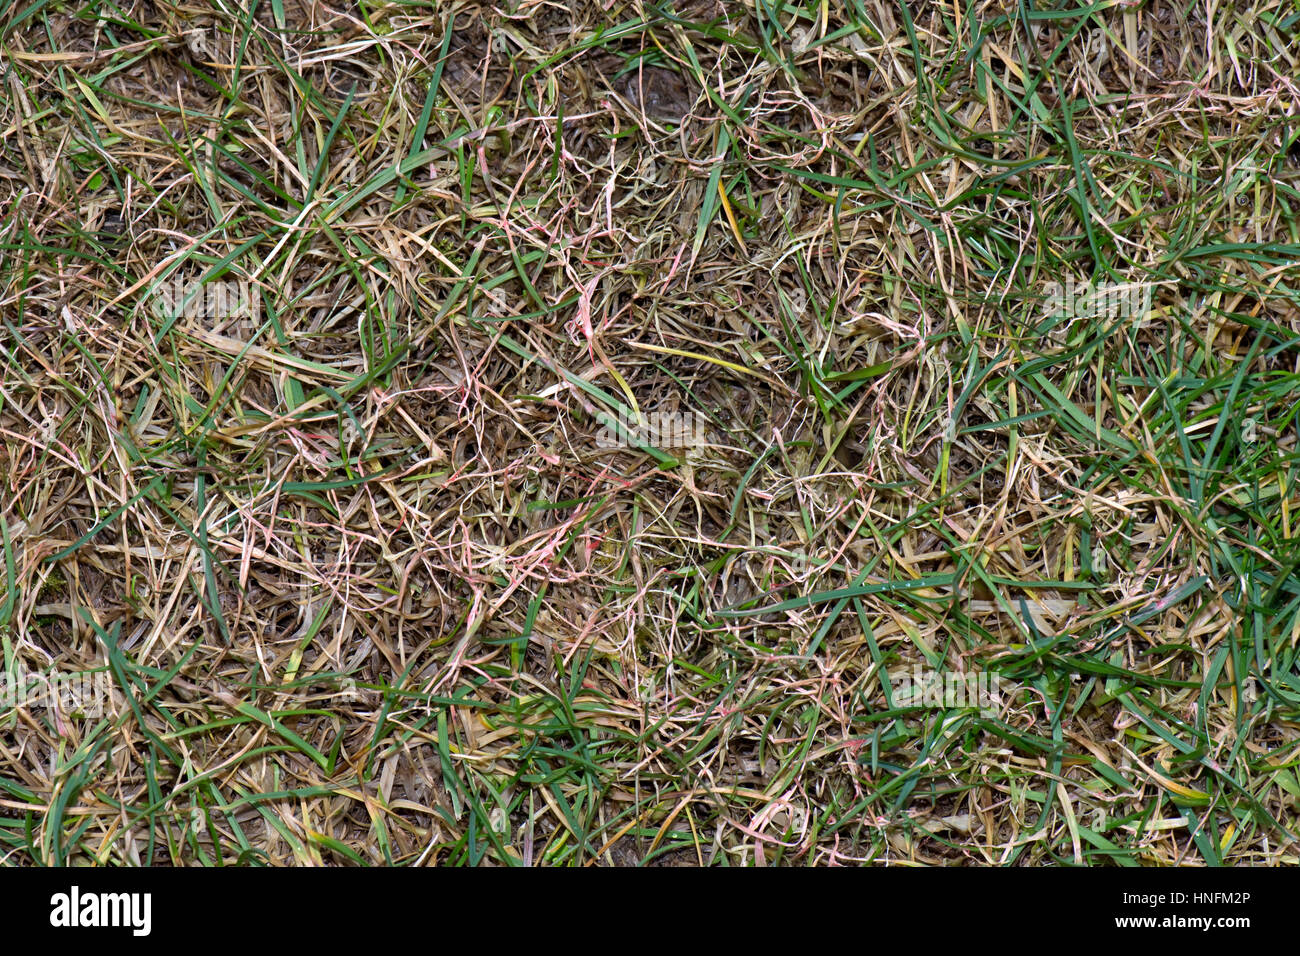 Red thread, Laetisaria fuciformis, damage and stromata from the disease on lawn grass Stock Photo